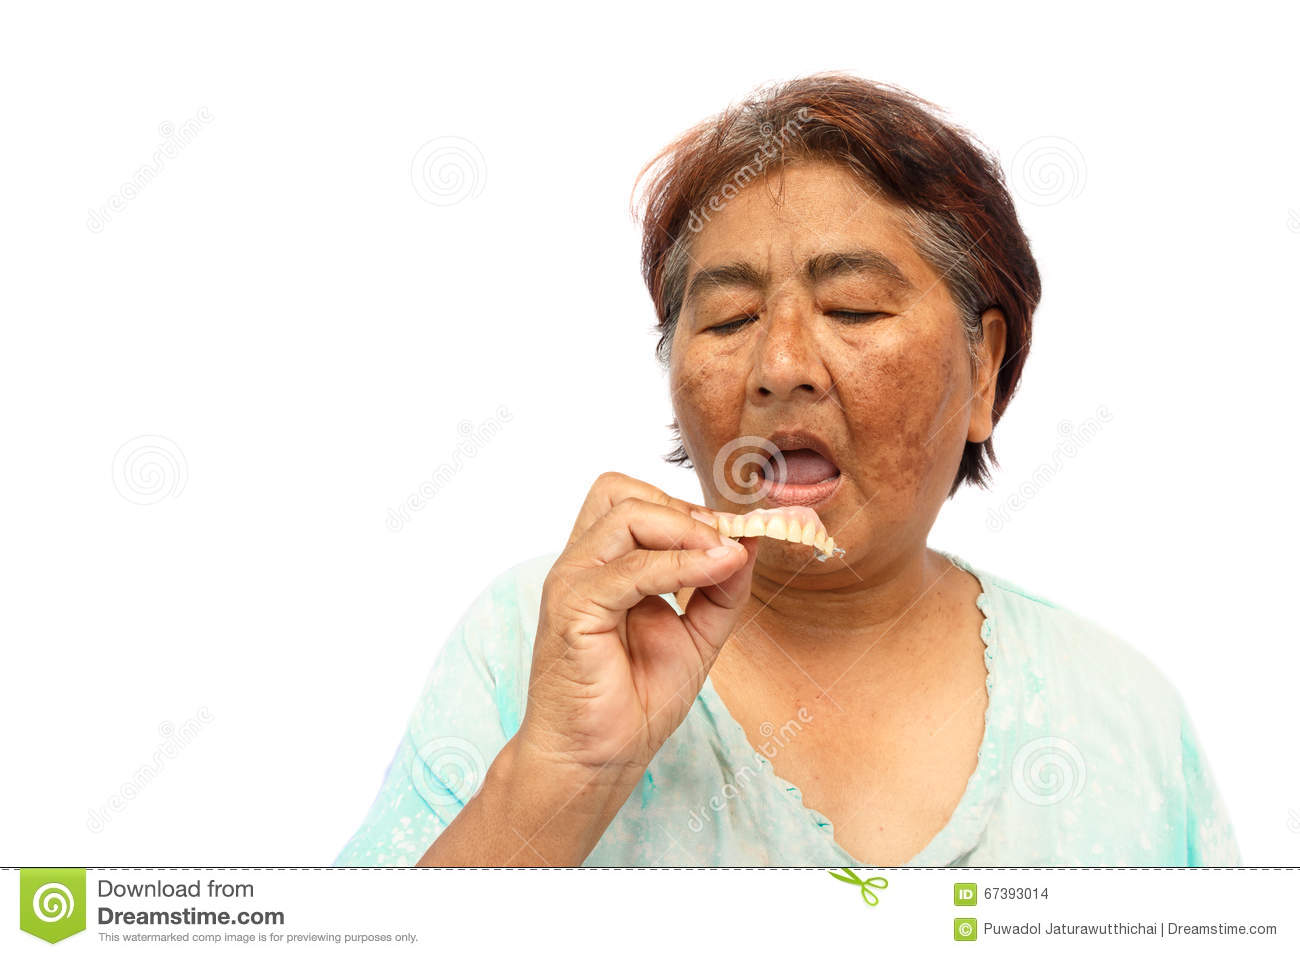 Putting dentures in mouth clipart.